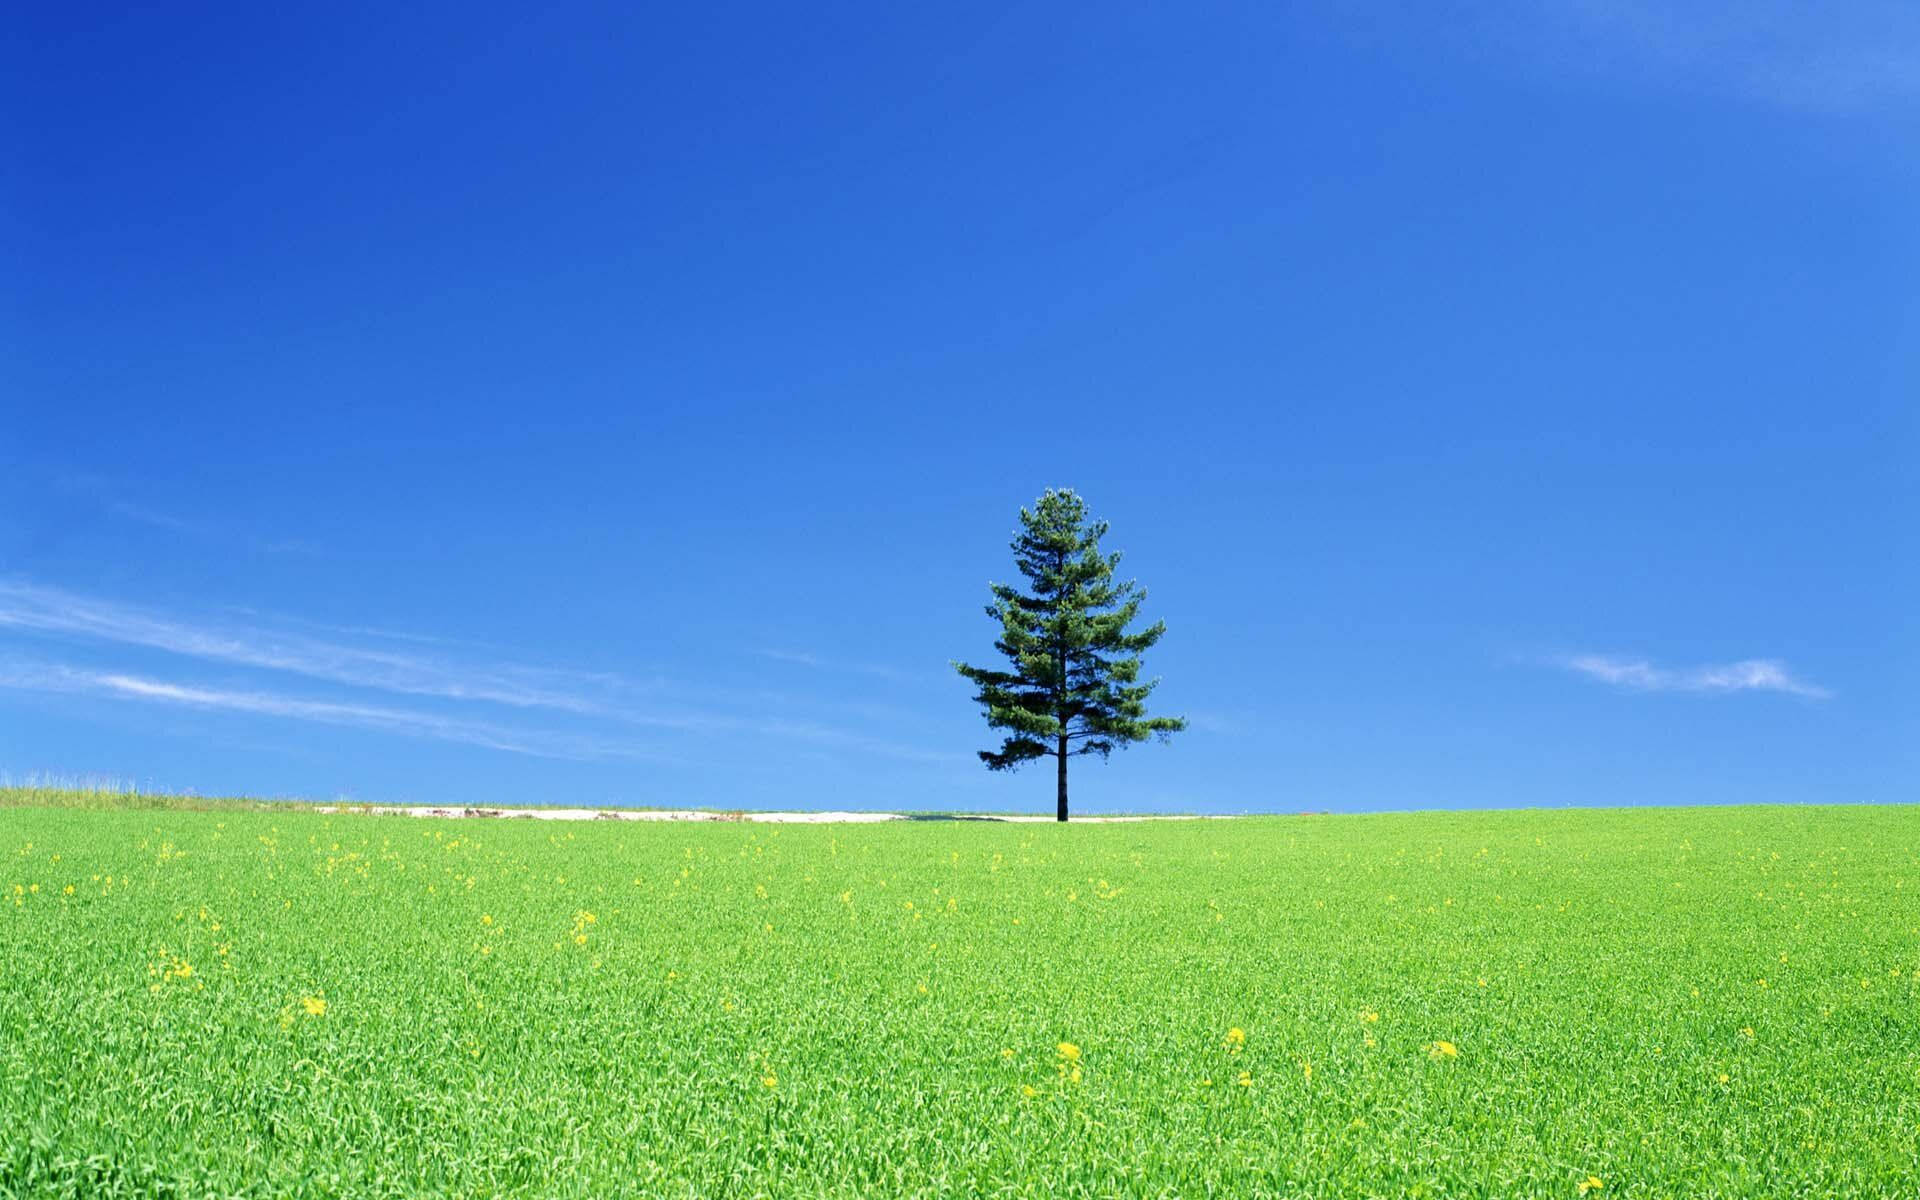 Peaceful View of a Tree in a Field Wallpaper